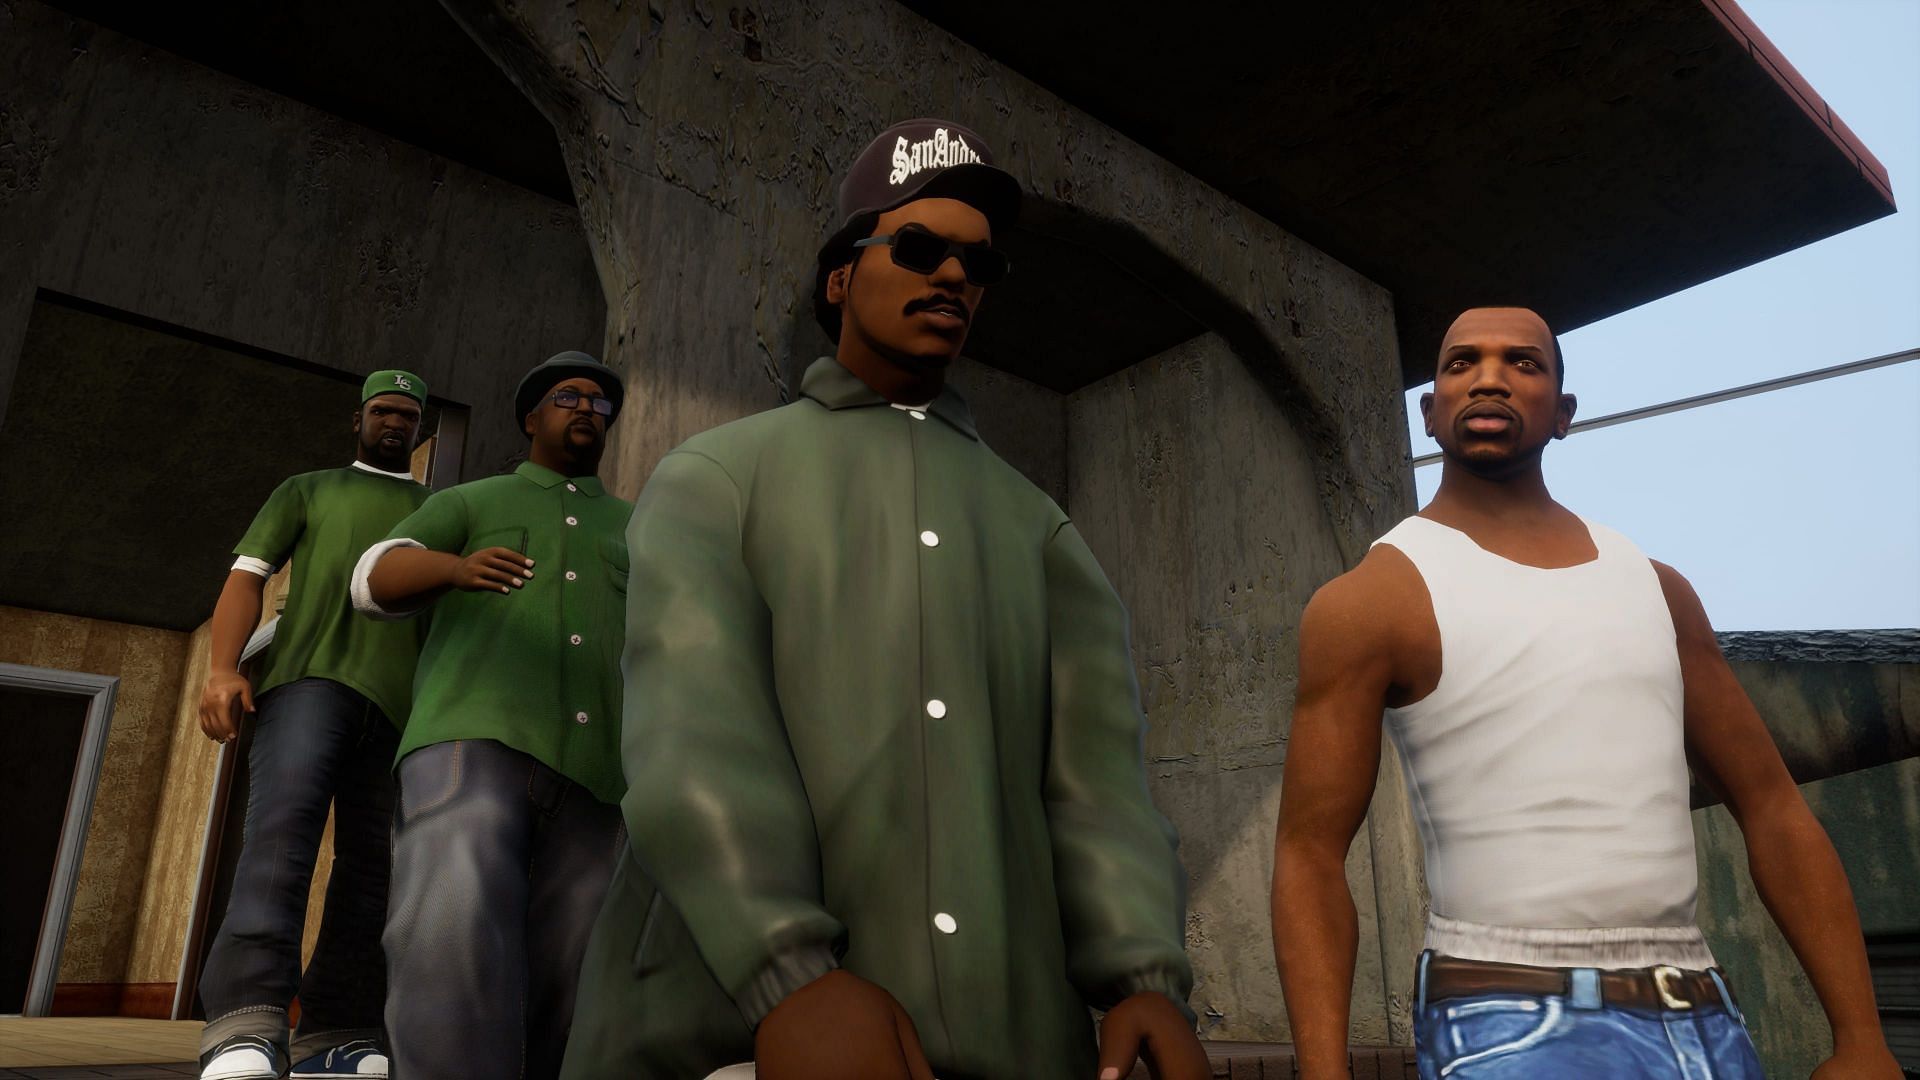 CJ is on the far right in this GTA Trilogy screenshot (Image via Rockstar Games)